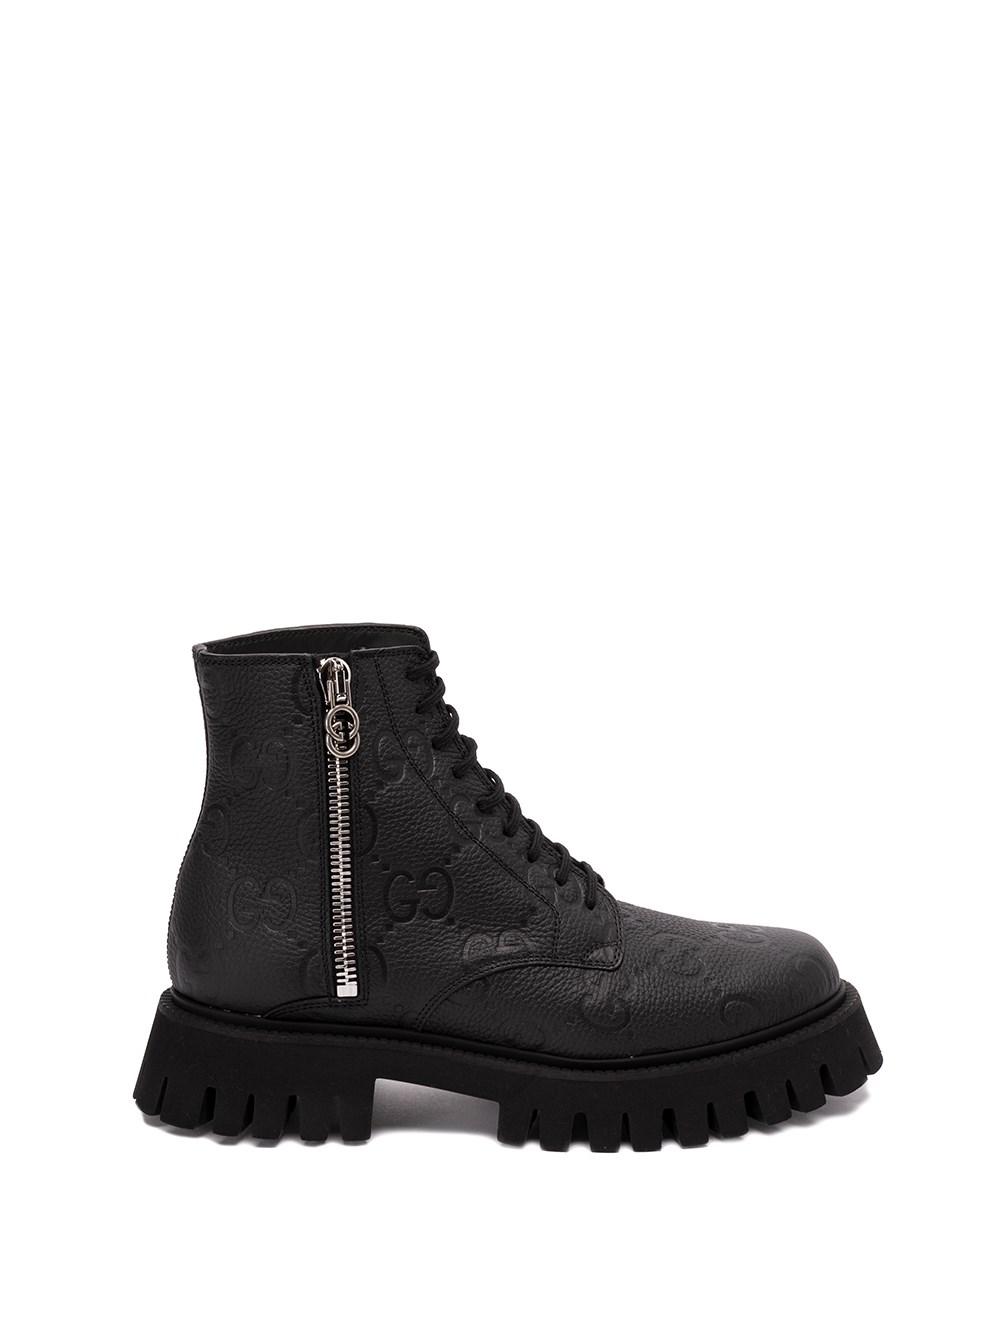 Gucci `Gg` Leather Boots in Black for Men | Lyst